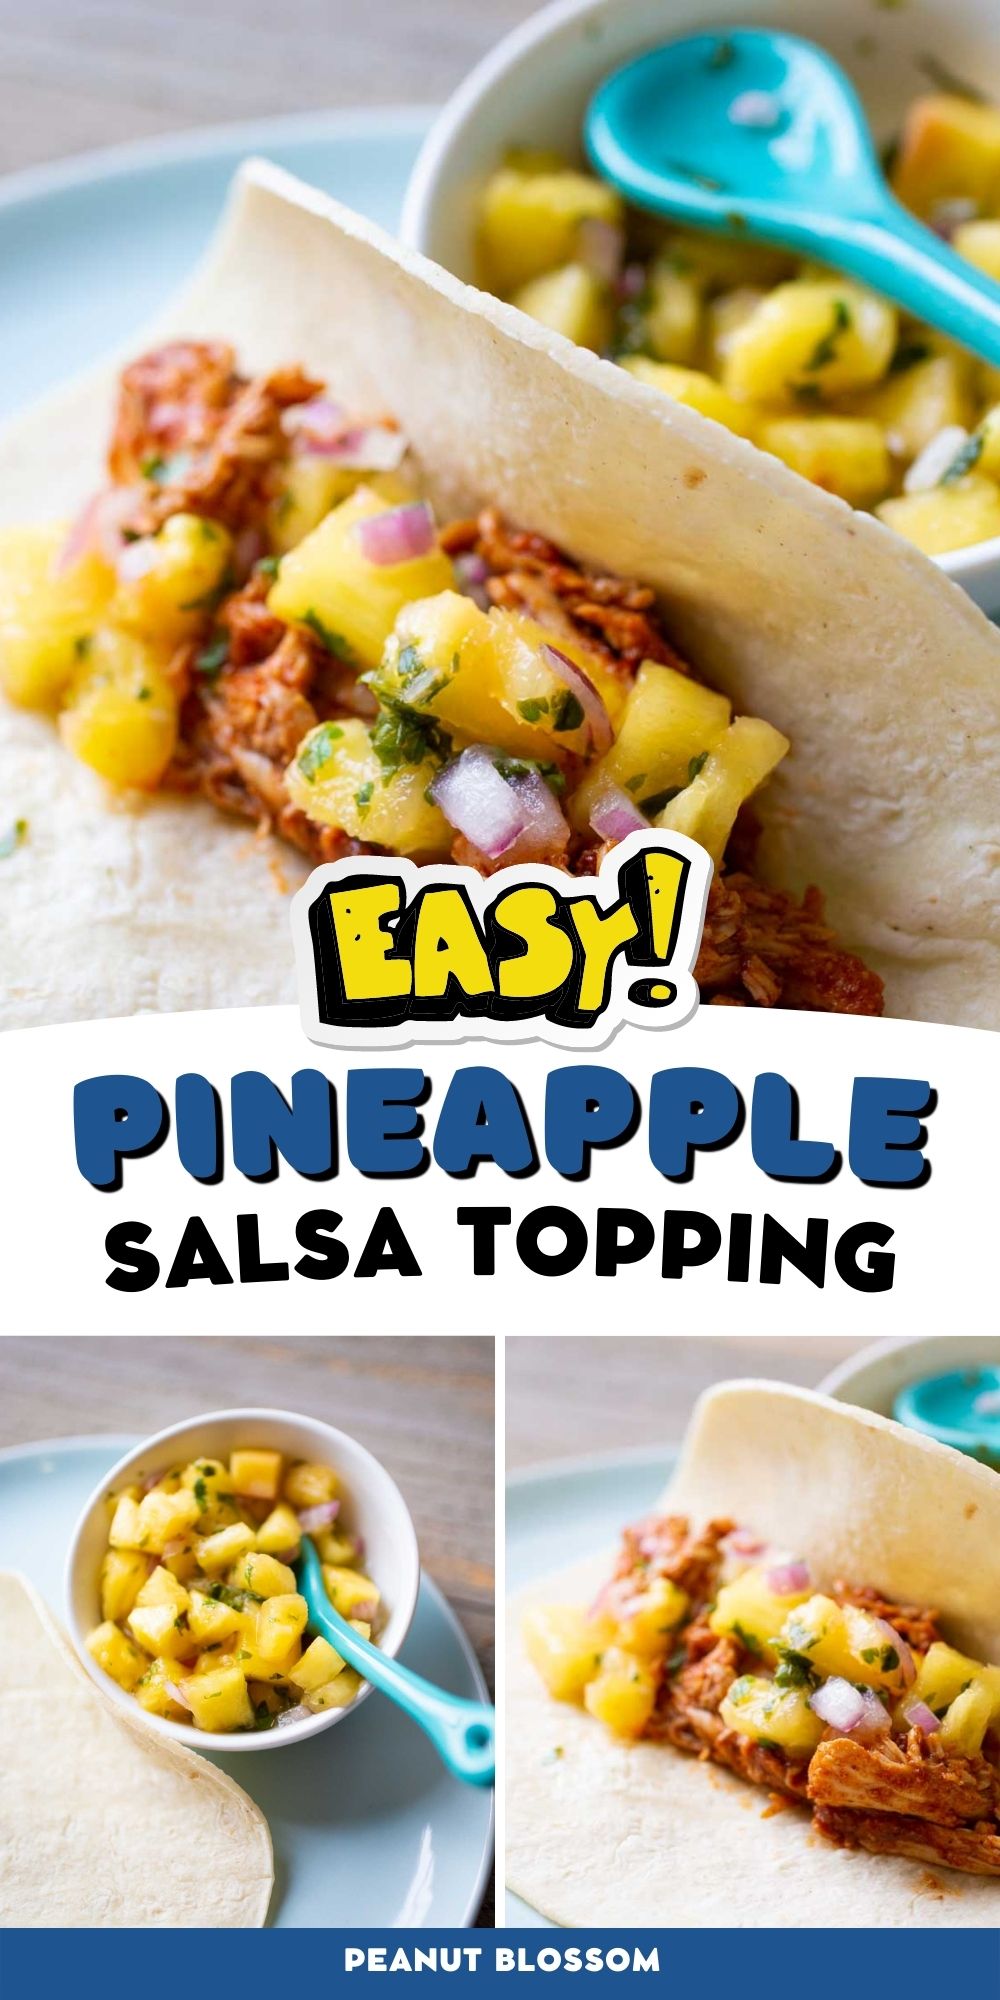 A taco with pineapple salsa on top is shown next to a bowl of pineapple salsa with a spoon.